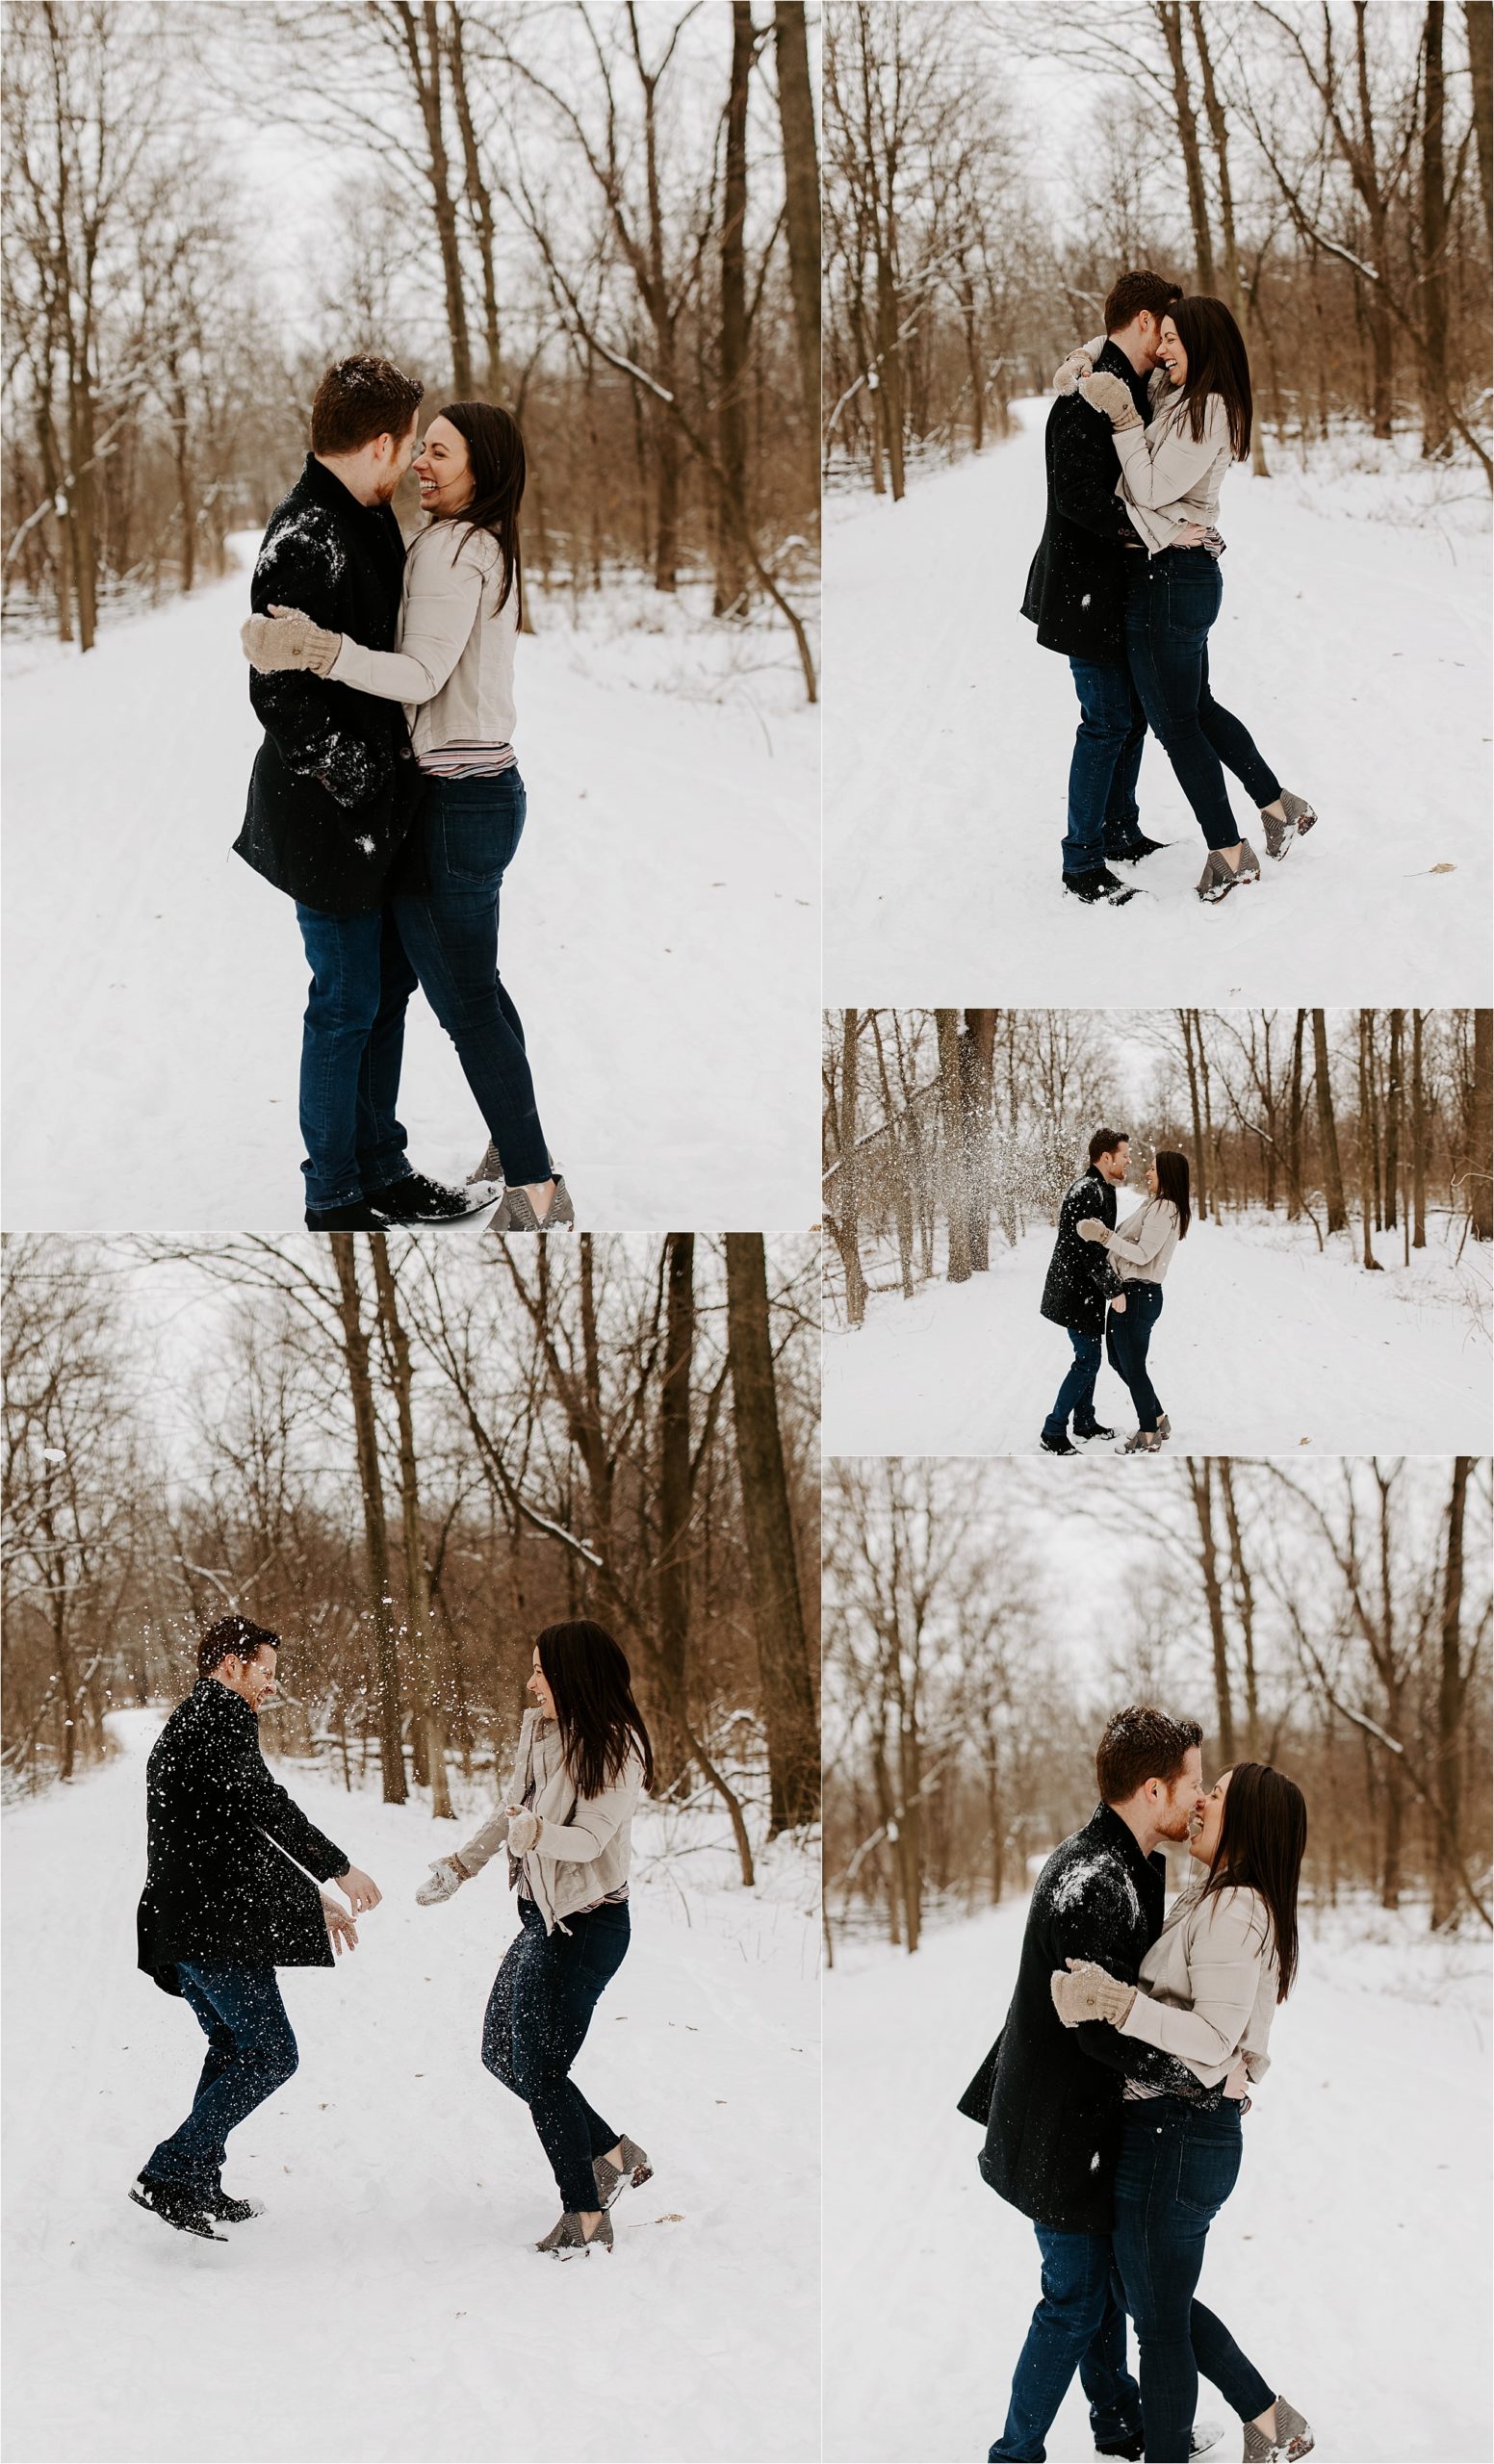 Snowy Engagement Photos in Naperville, IL. Chicago Wedding Photographer. Krystal Richmond Photography